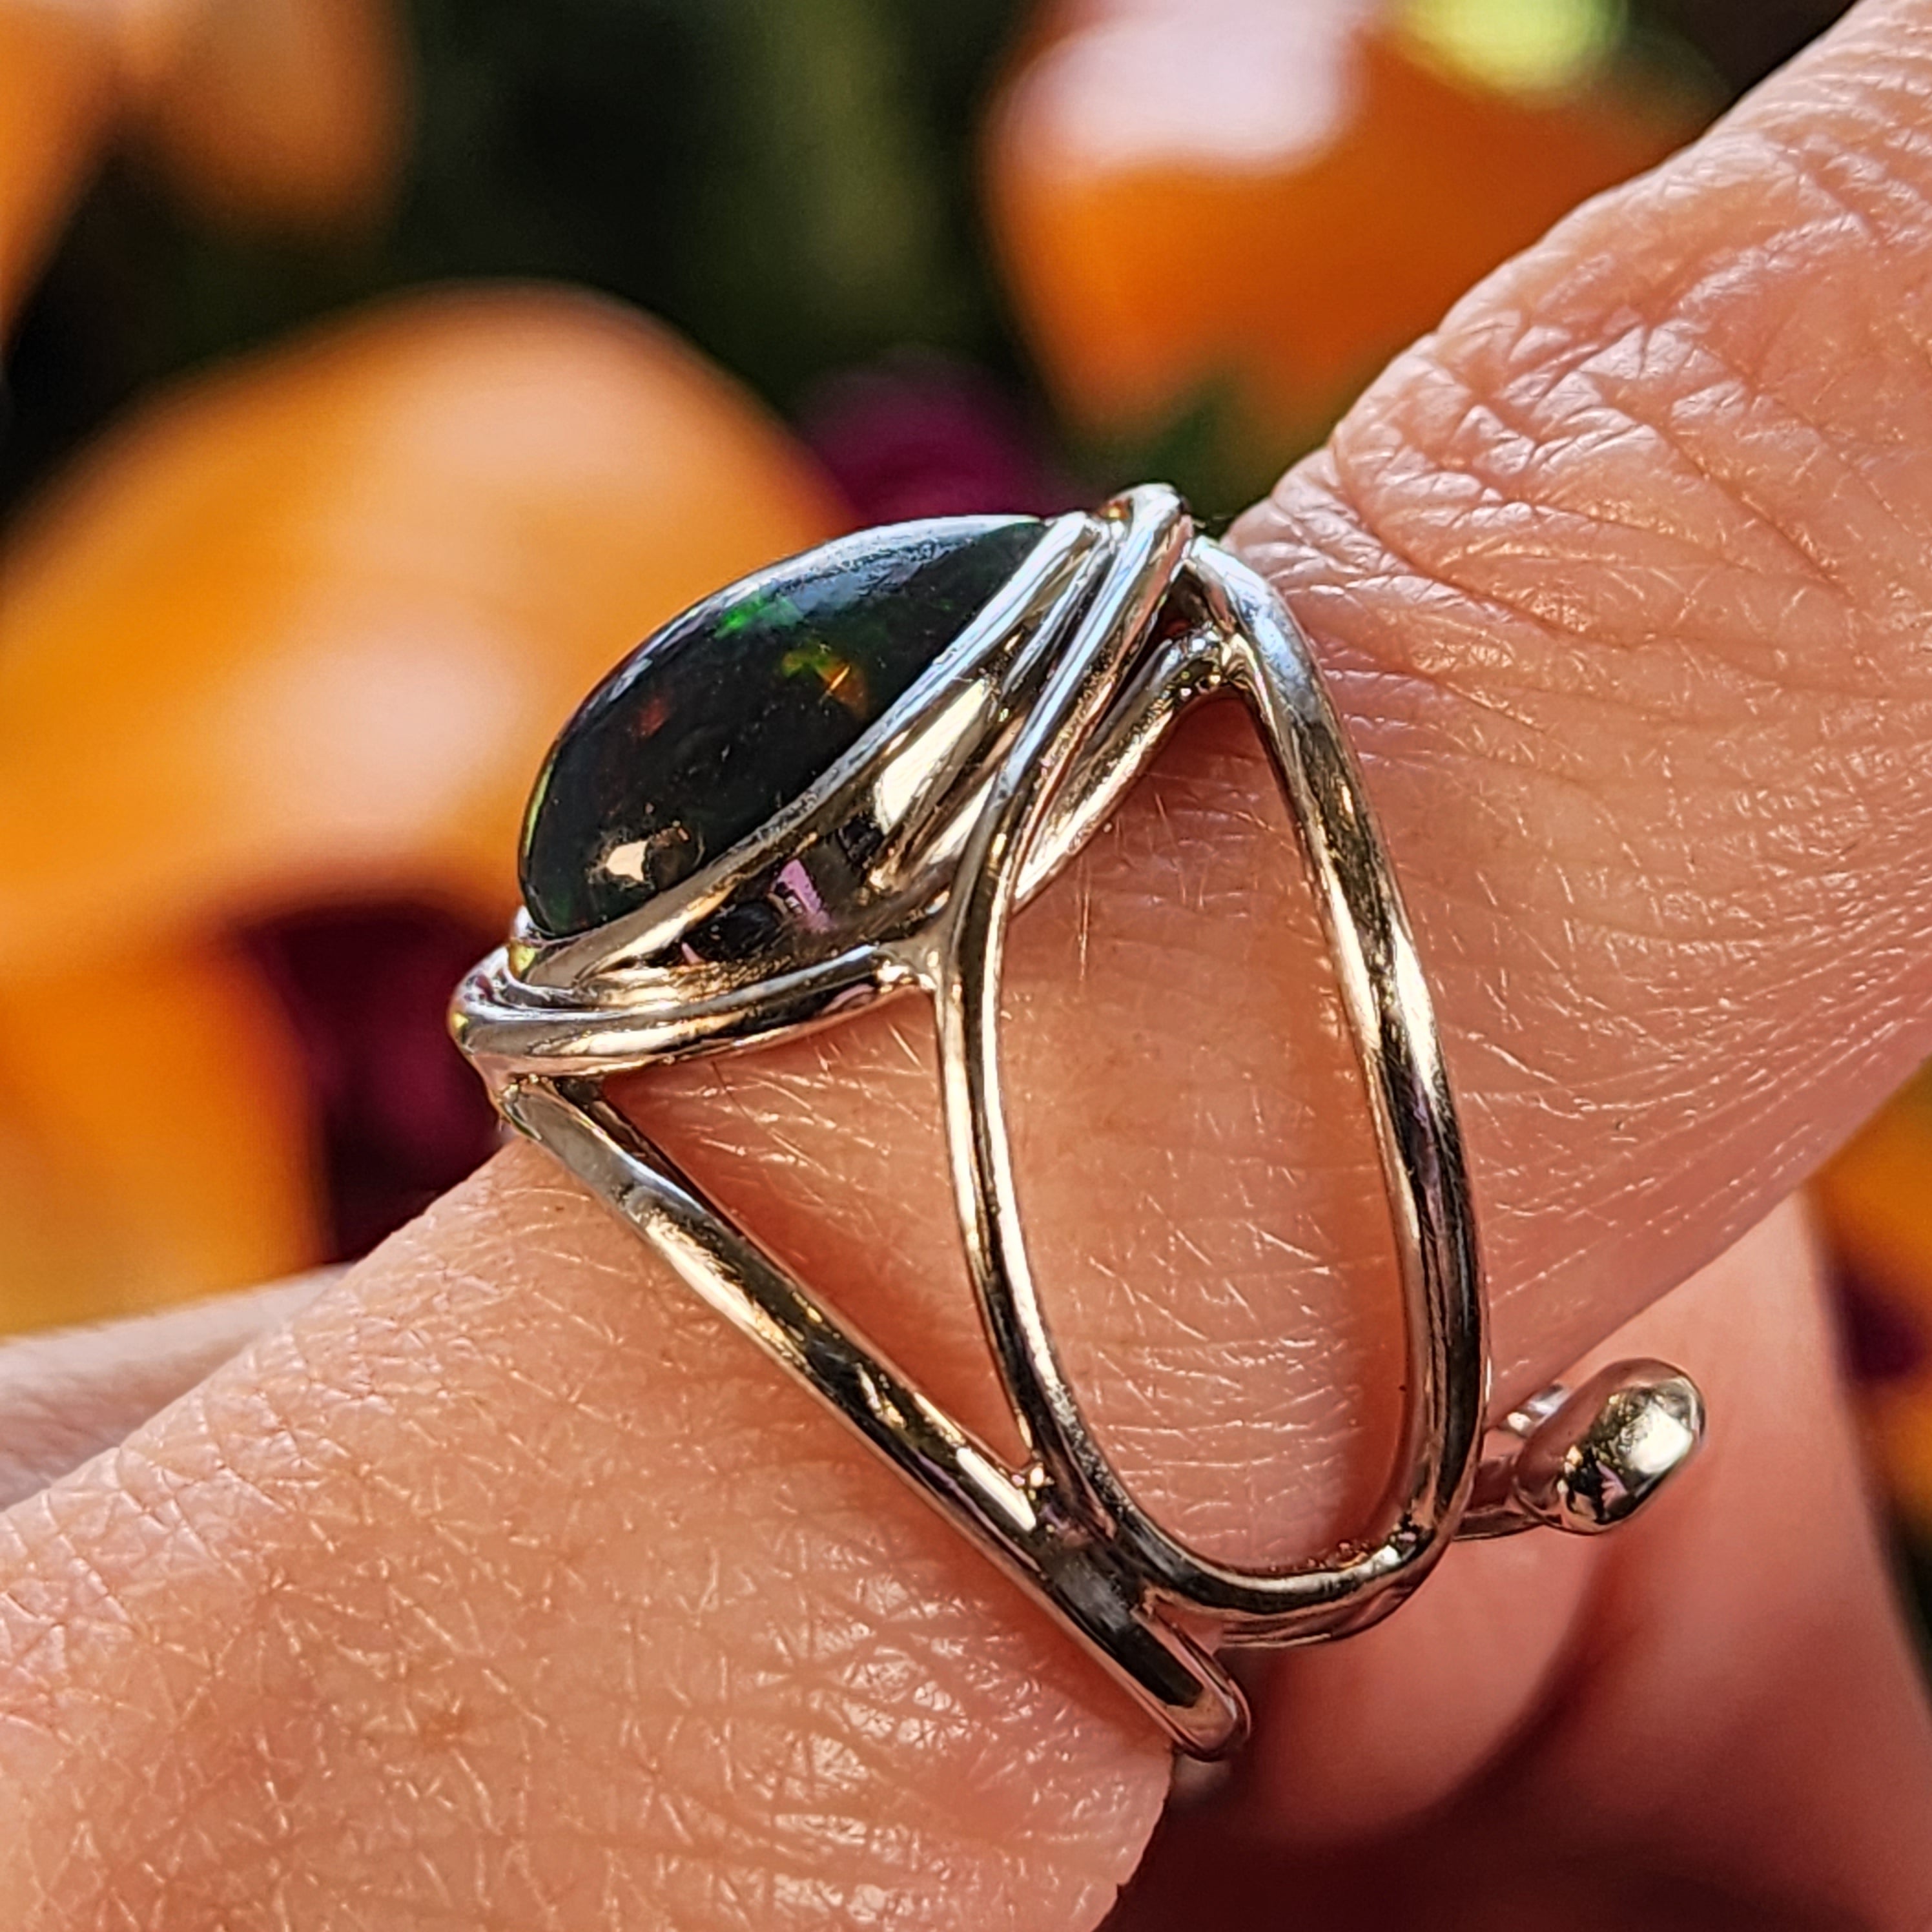 Black Precious Opal Finger Cuff Adjustable Ring .925 Silver for Good Luck, Protection and Joy